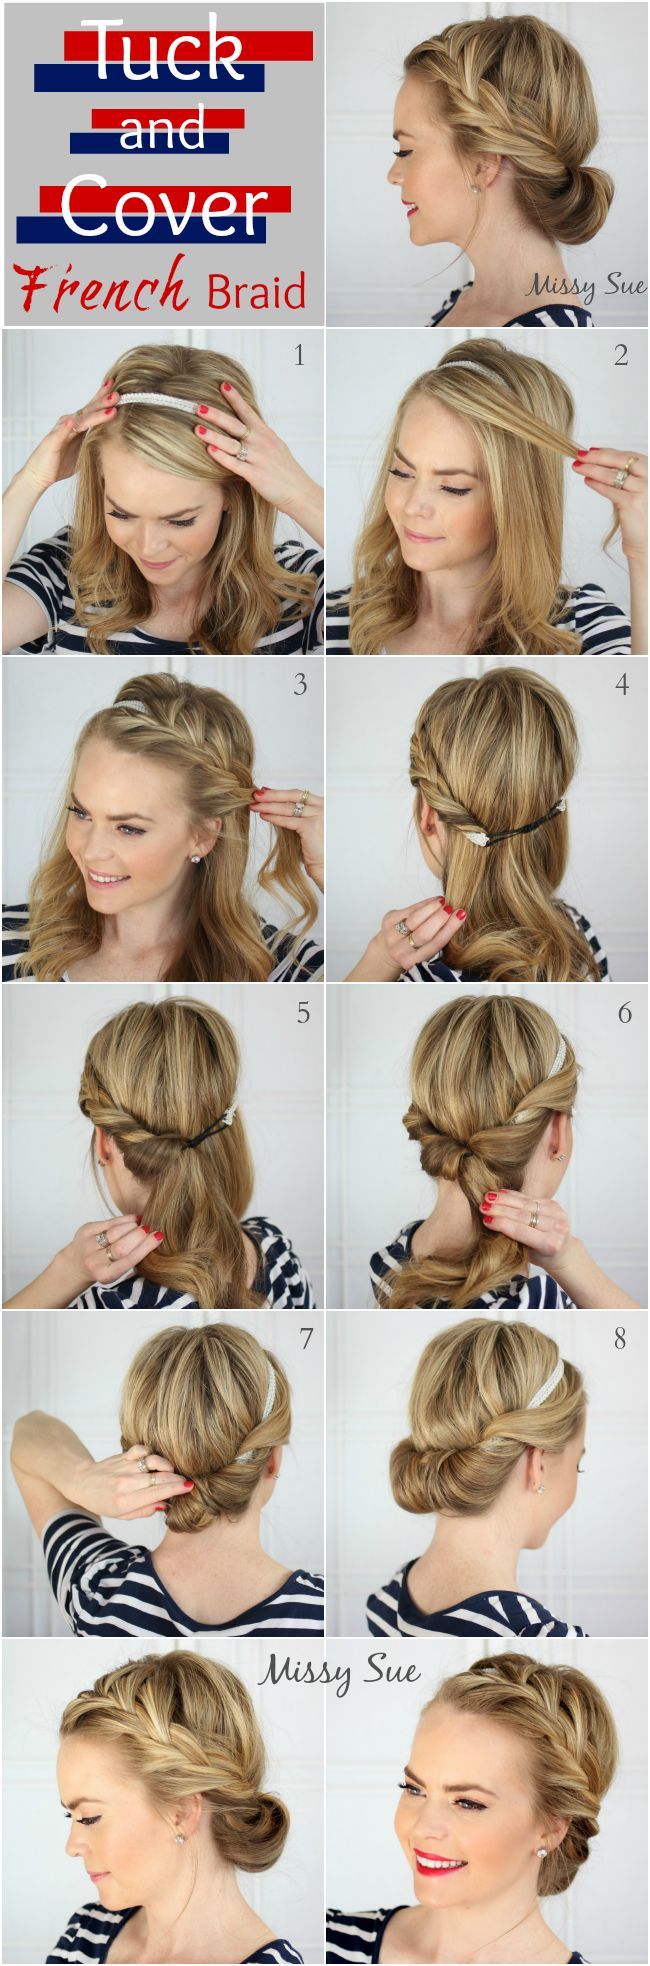 Tuck and Cover French Braid